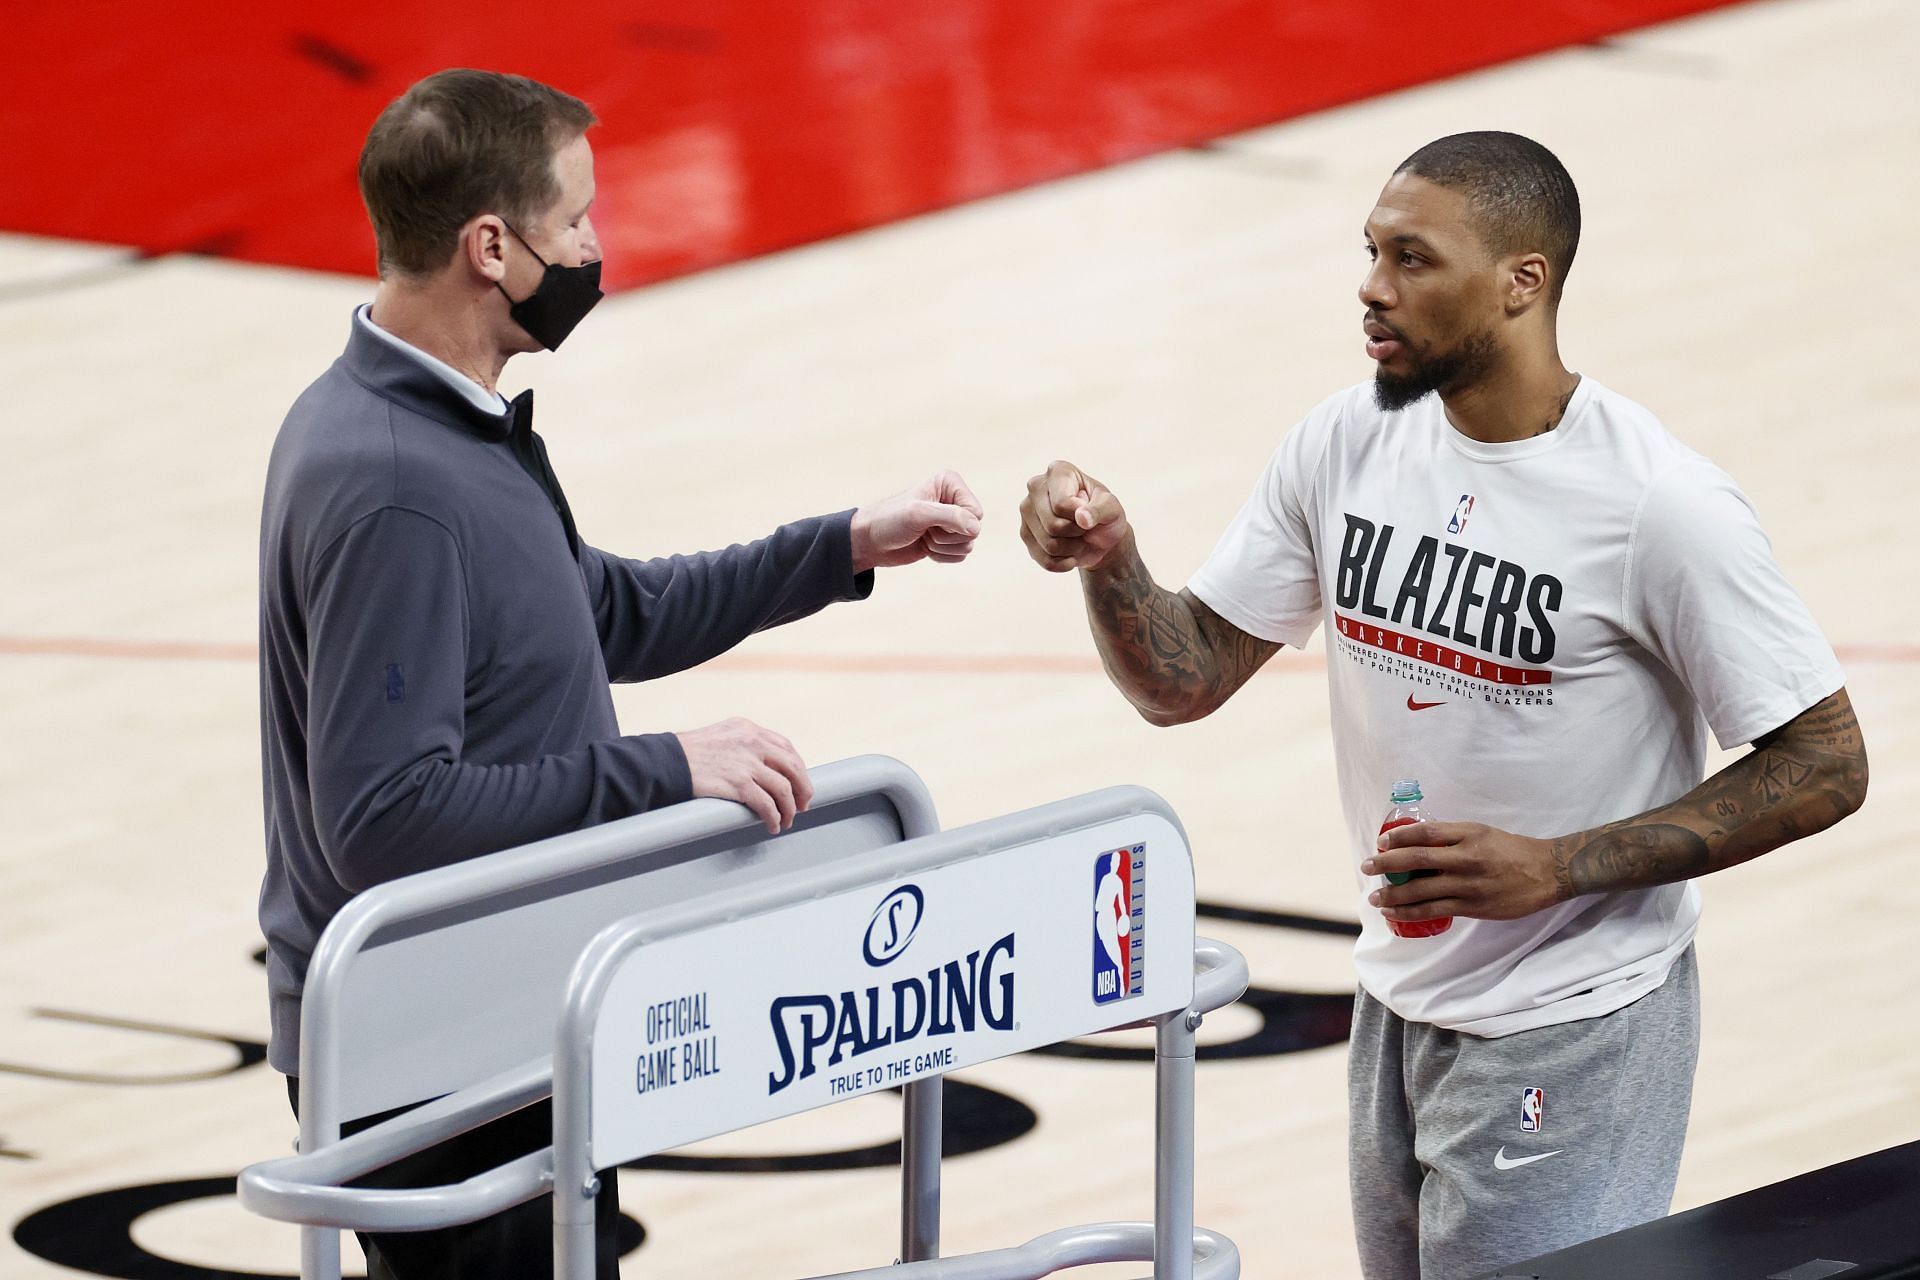 Terry Stotts could lead to the LA Lakers making a move on Damian Lillard.